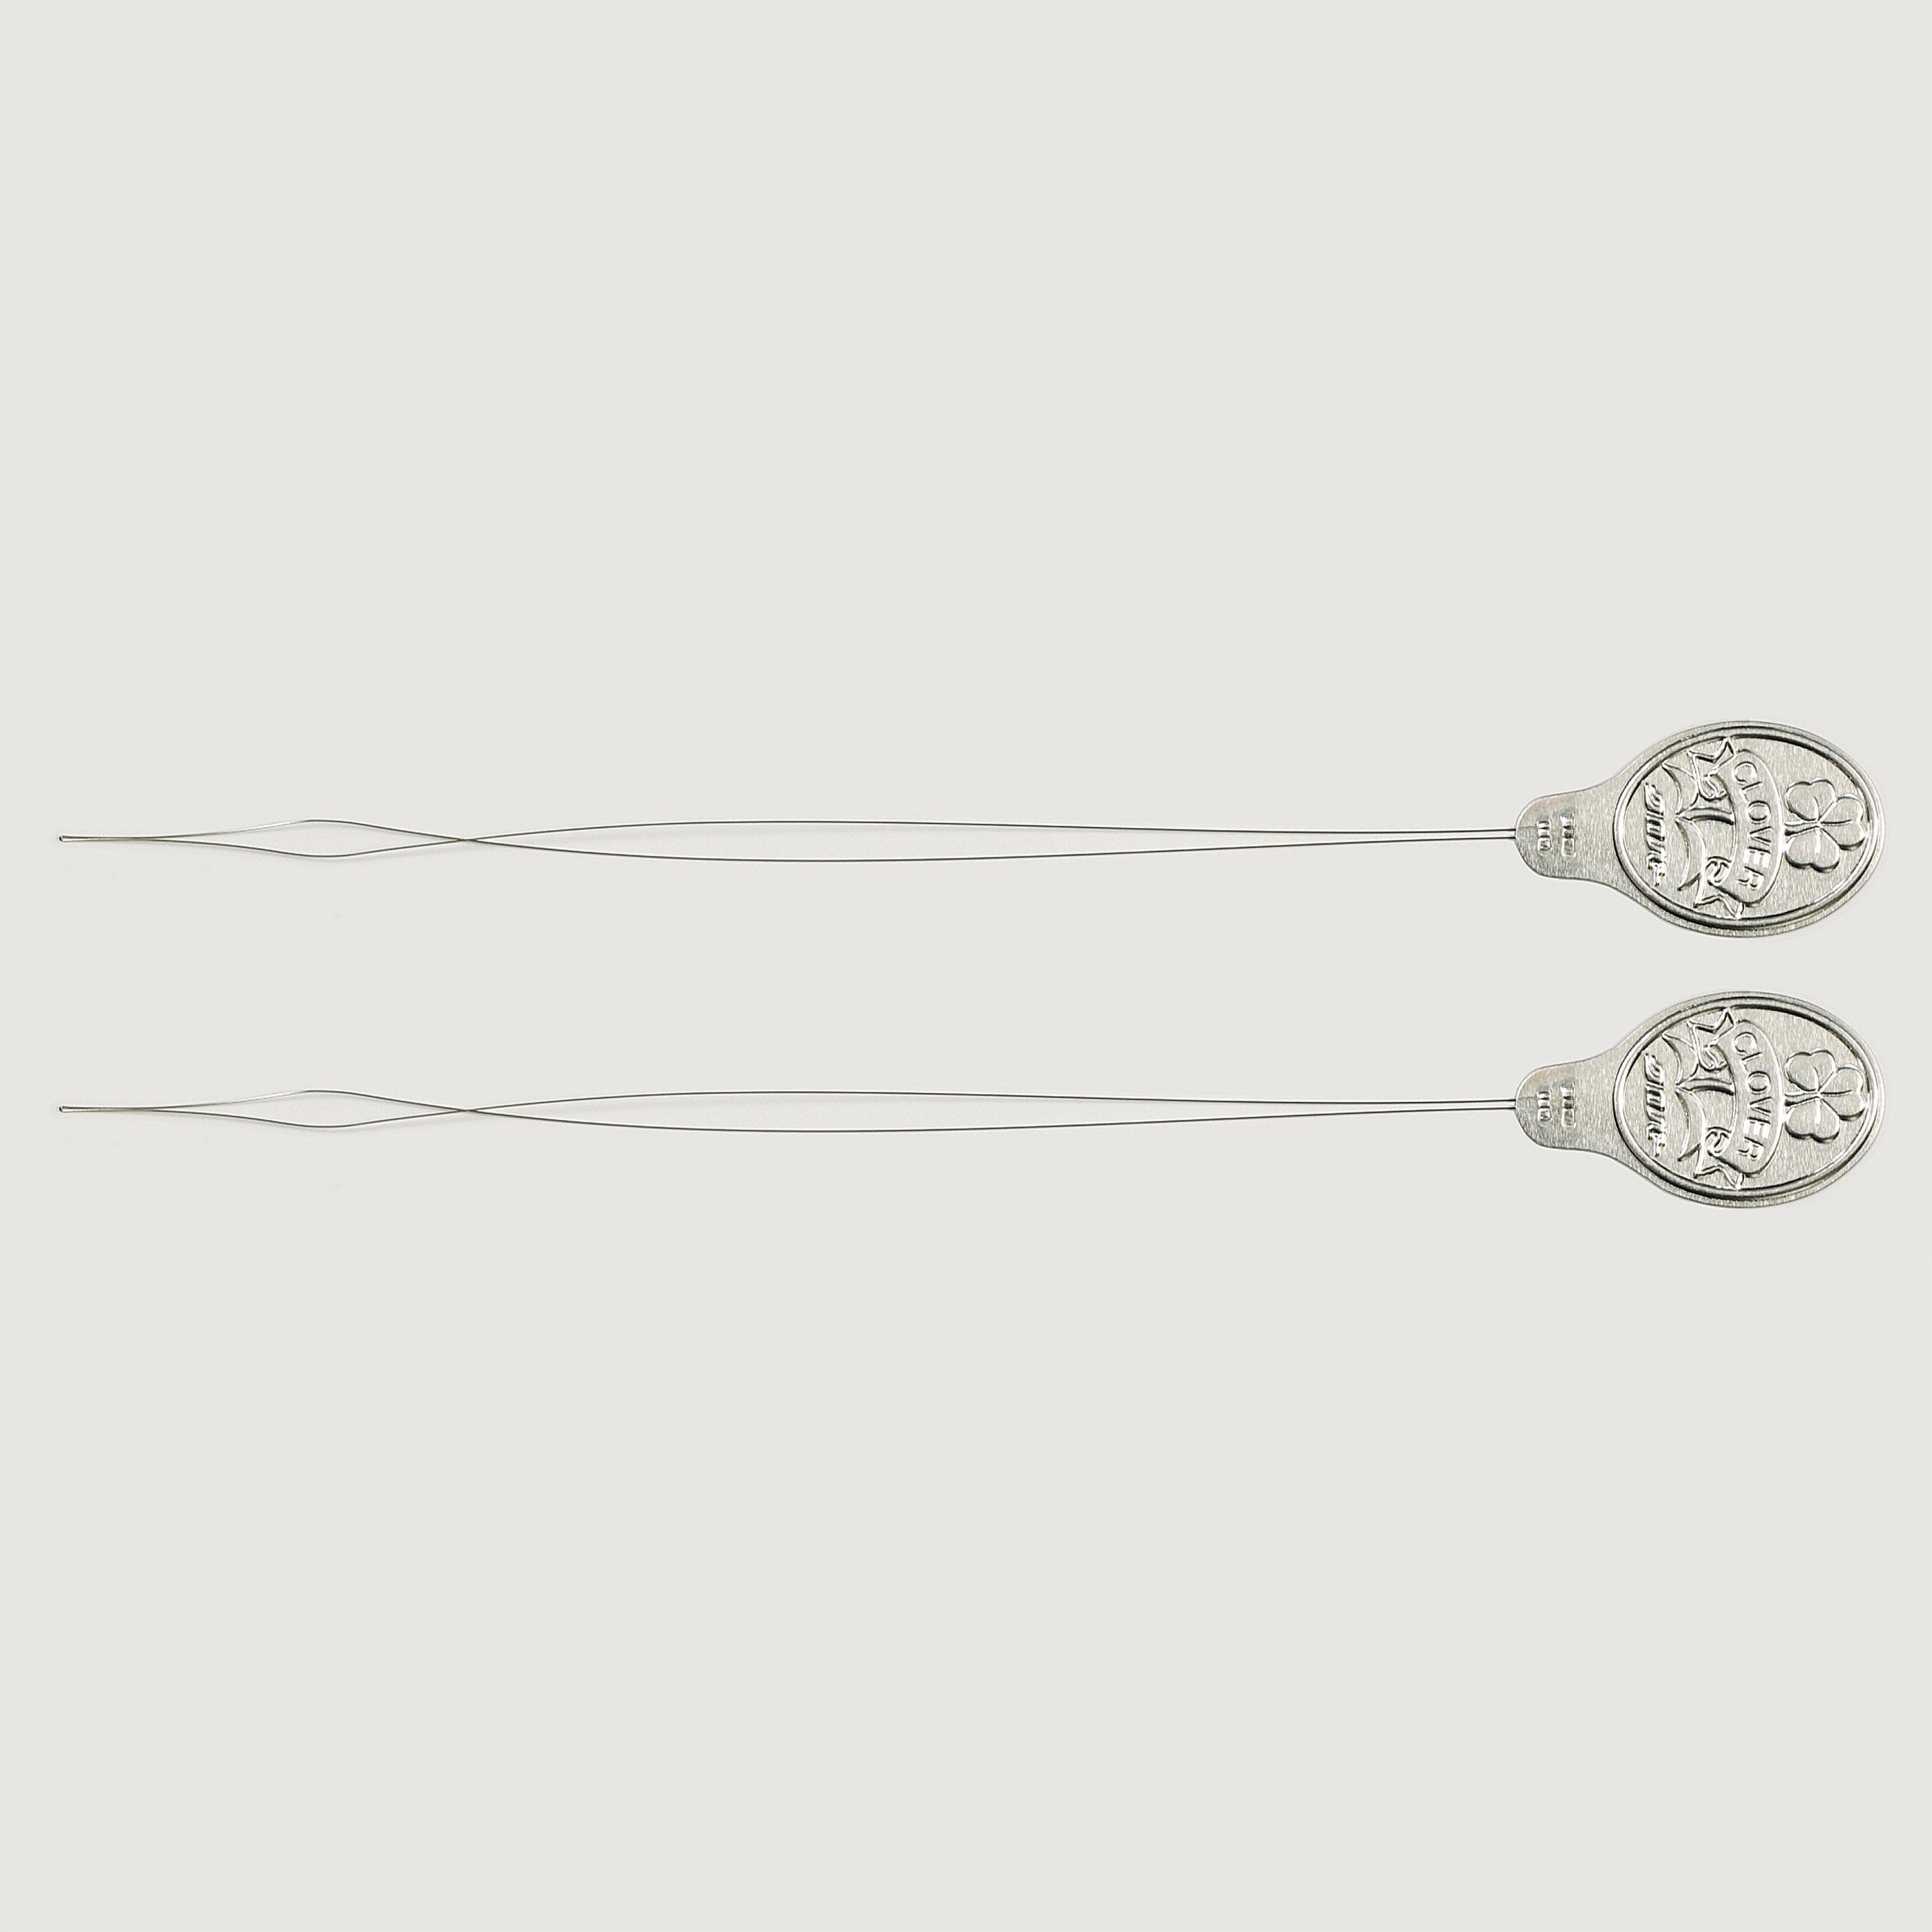 clover embroidery threader – Needles & Wool